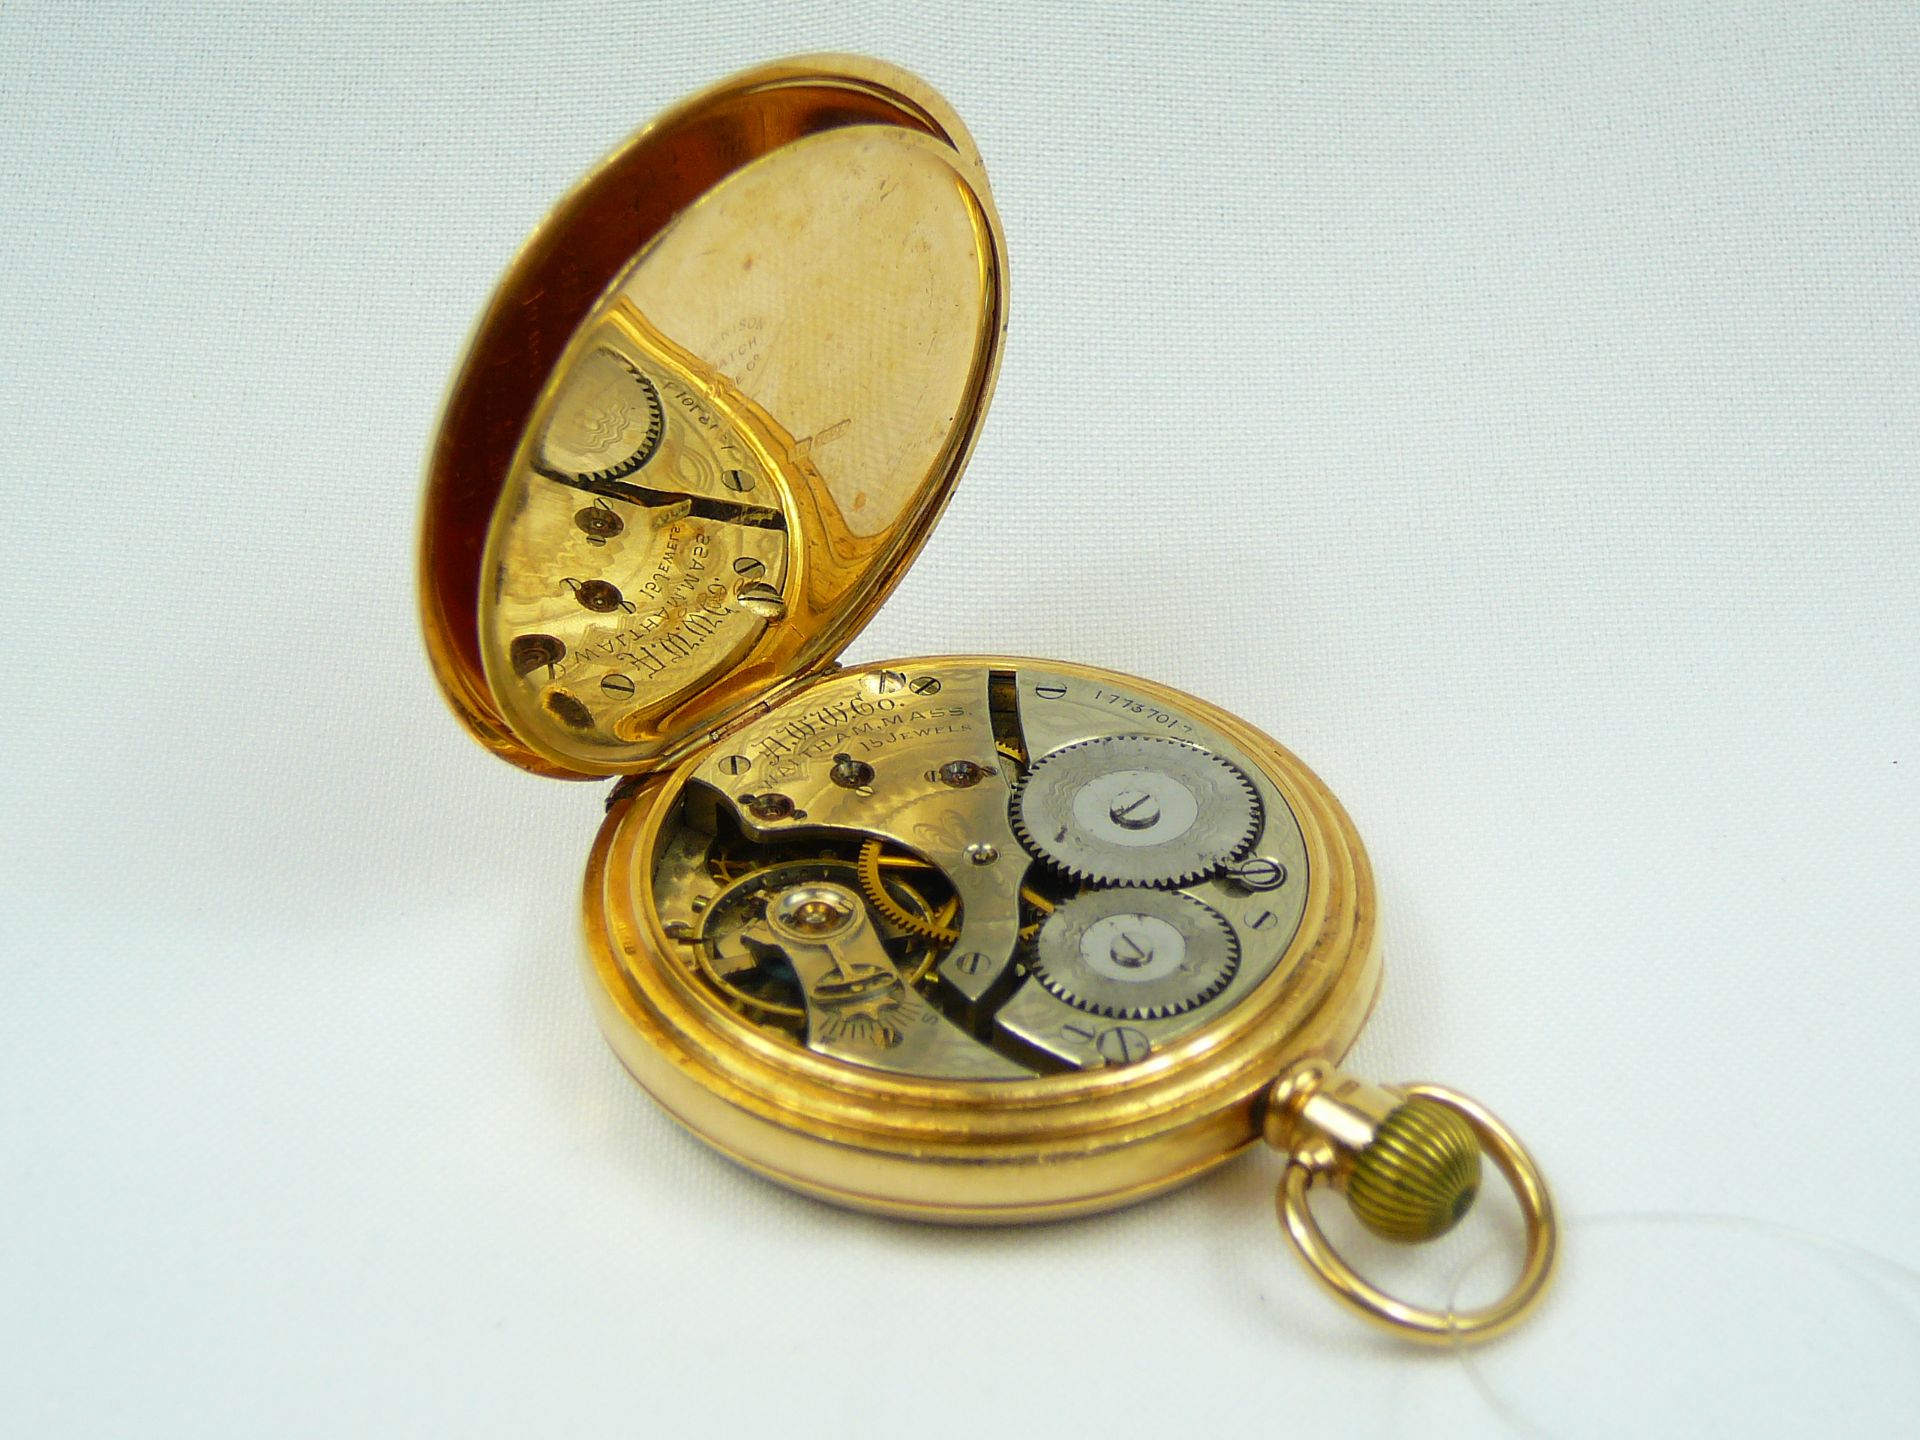 Gents gold pocket watch - Image 6 of 7